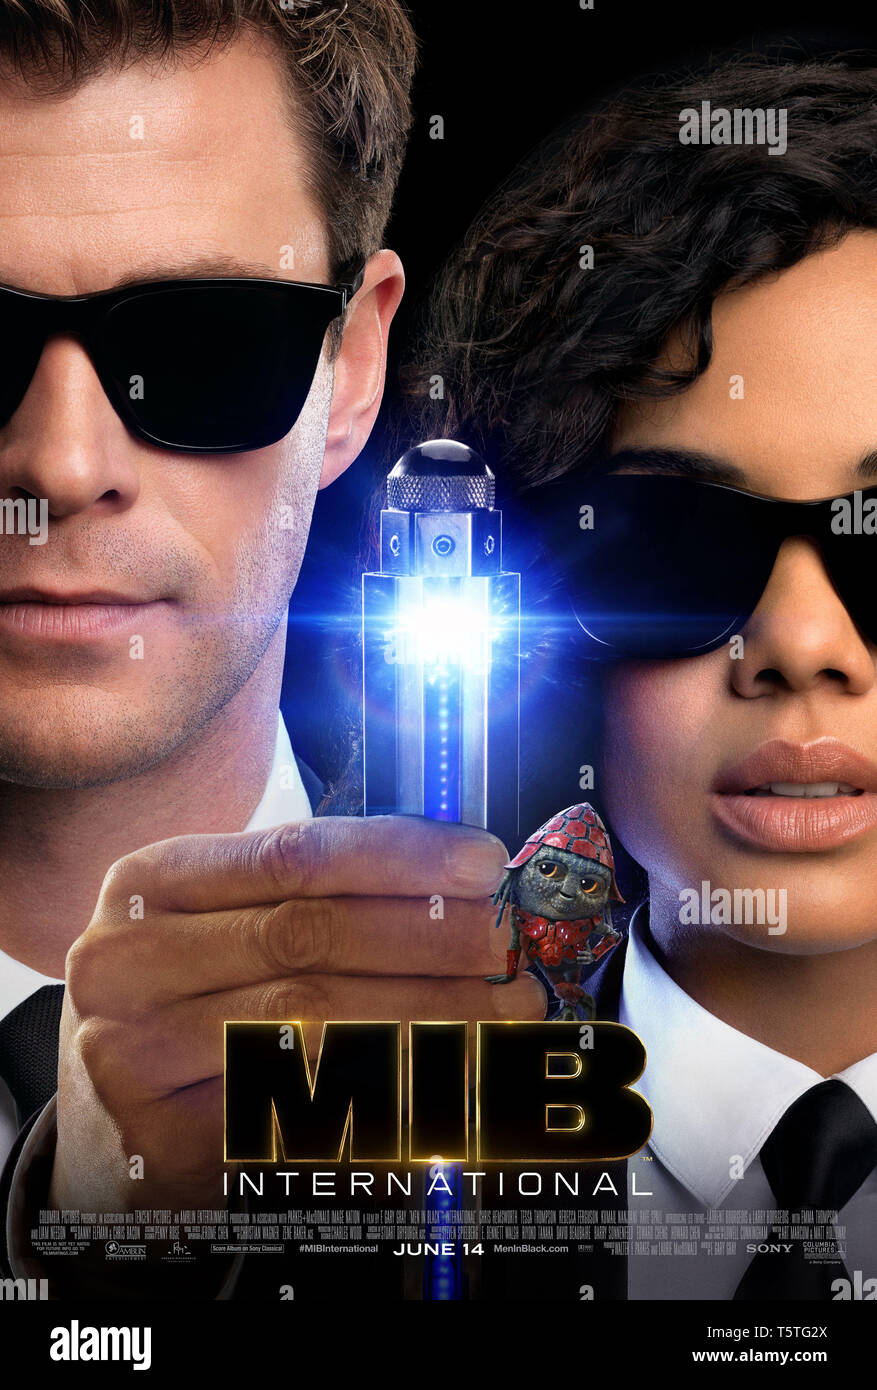 RELEASE DATE: June 19, 2019 TITLE: Men in Black: International STUDIO: Columbia Pictures DIRECTOR: F. Gary Gray PLOT: The Men in Black have always protected the Earth from the scum of the universe. In this new adventure, they tackle their biggest threat to date: a mole in the Men in Black organization. STARRING: TESSA THOMPSON as Em, CHRIS HEMSWORTH as H poster art. (Credit Image: © Columbia Pictures/Entertainment Pictures) Stock Photo